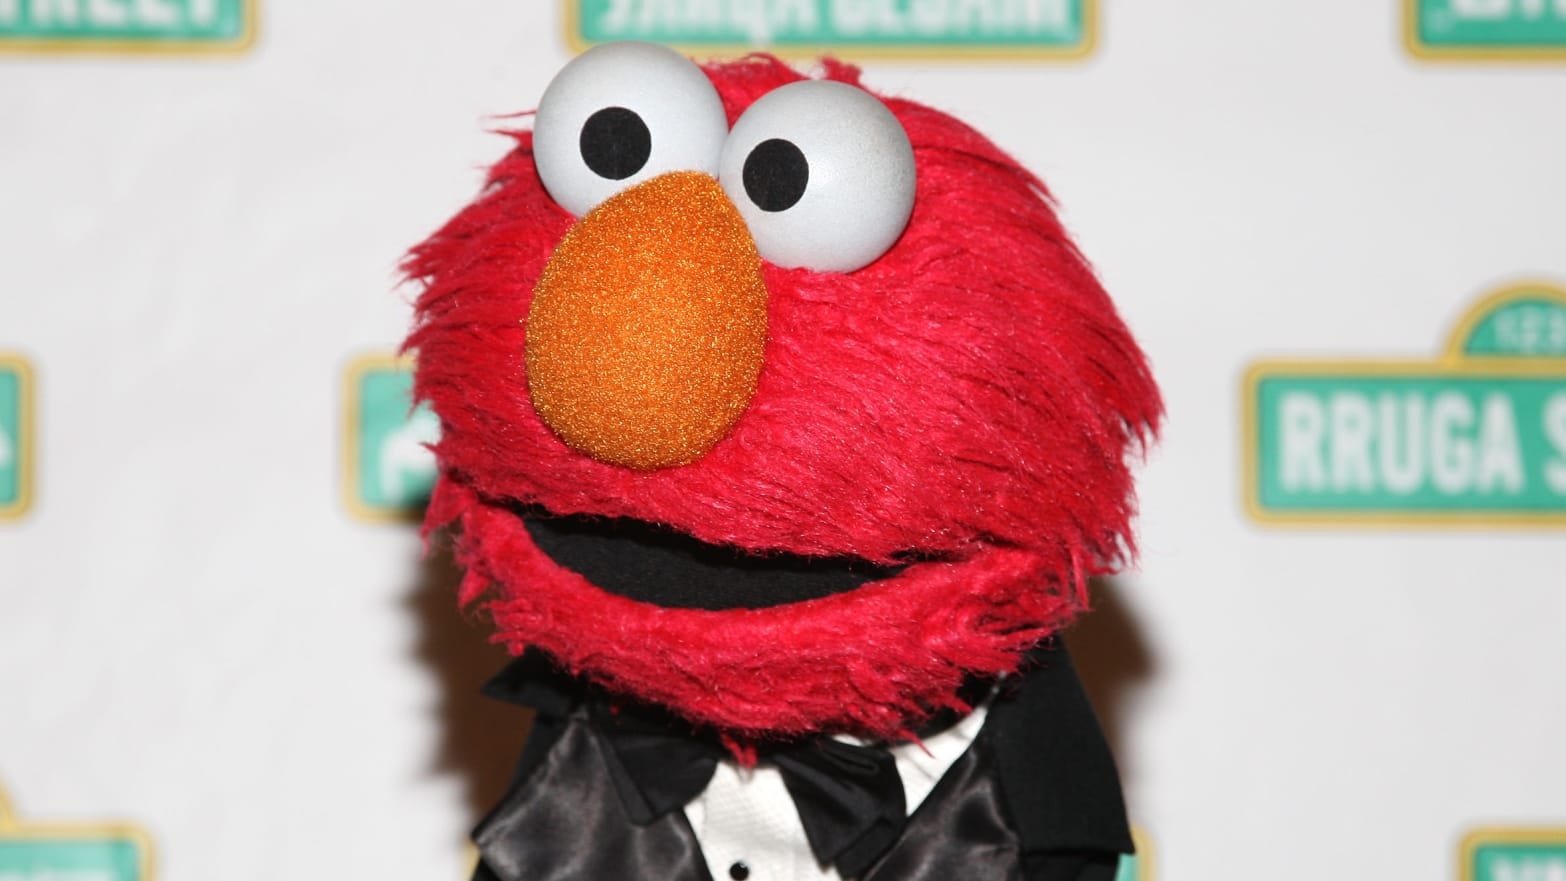 Elmo attends the 6th Annual Sesame Workshop Benefit Gala at Cipriani 42nd Street in New York City.